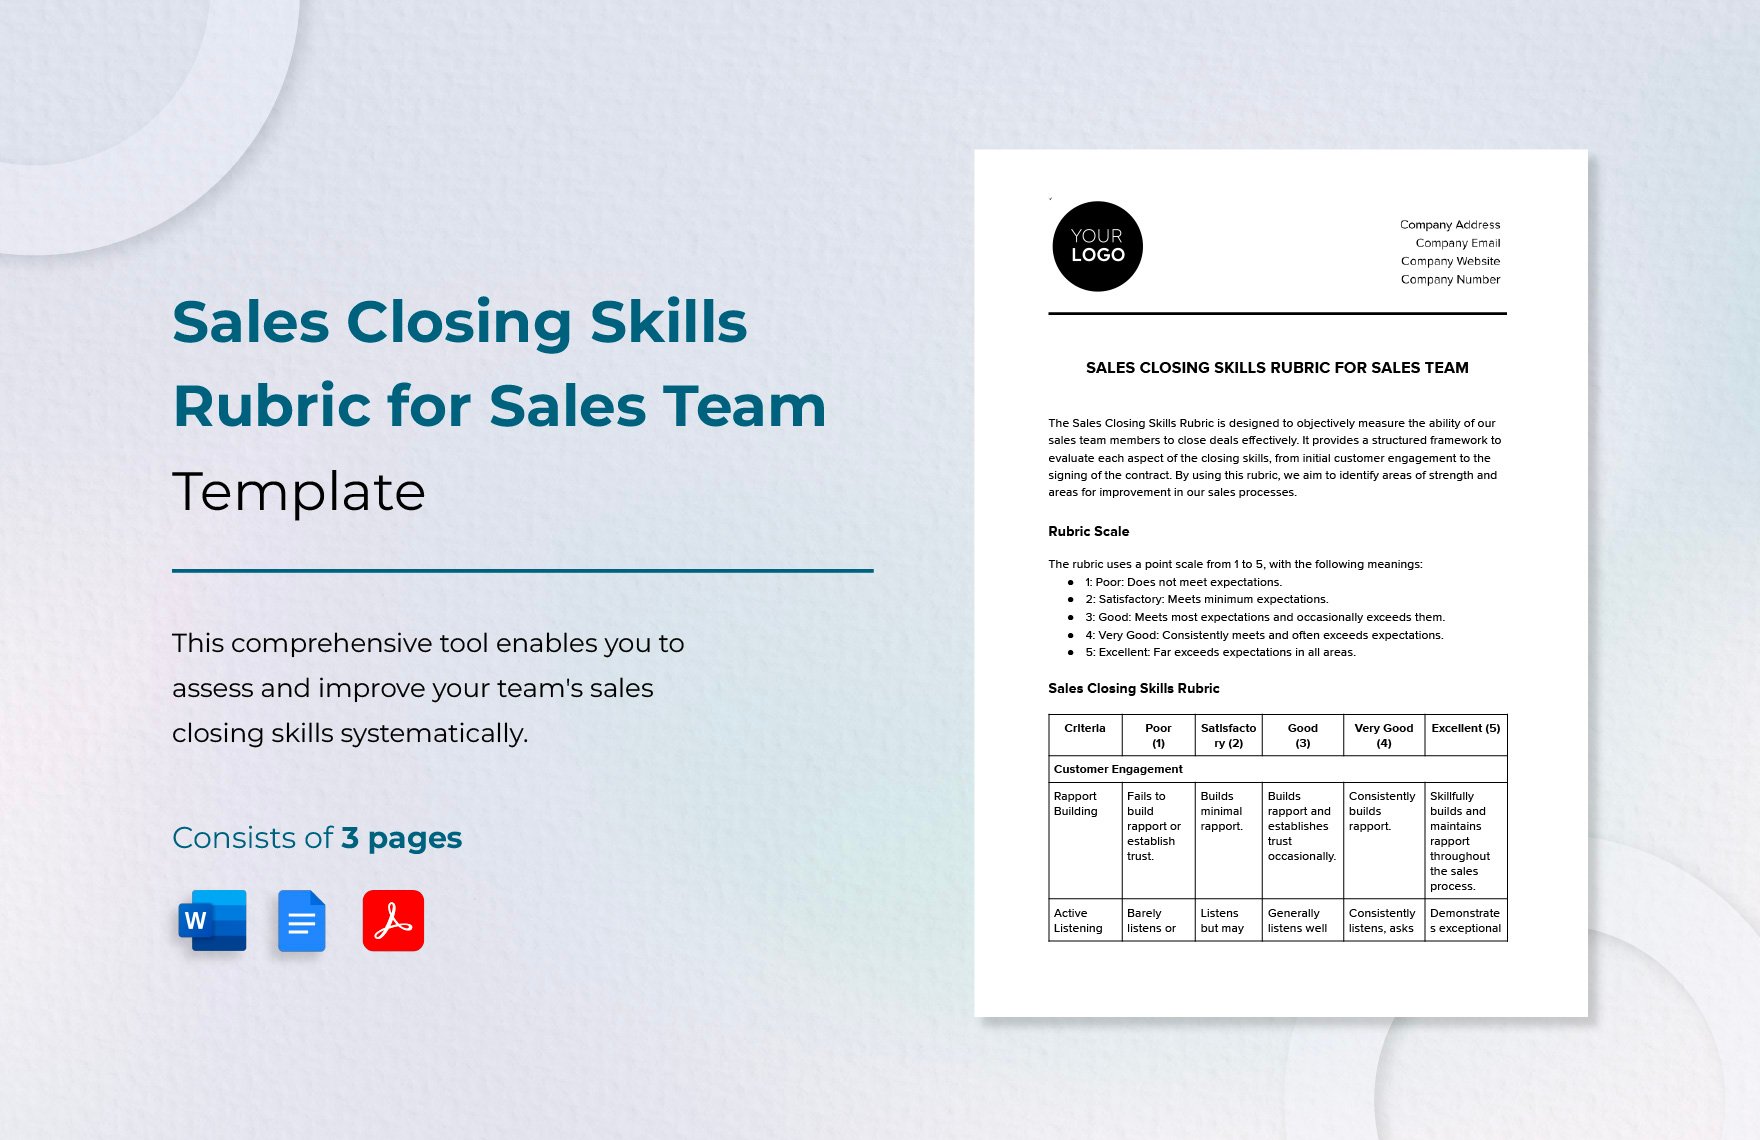 Sales Closing Skills Rubric for Sales Team Template